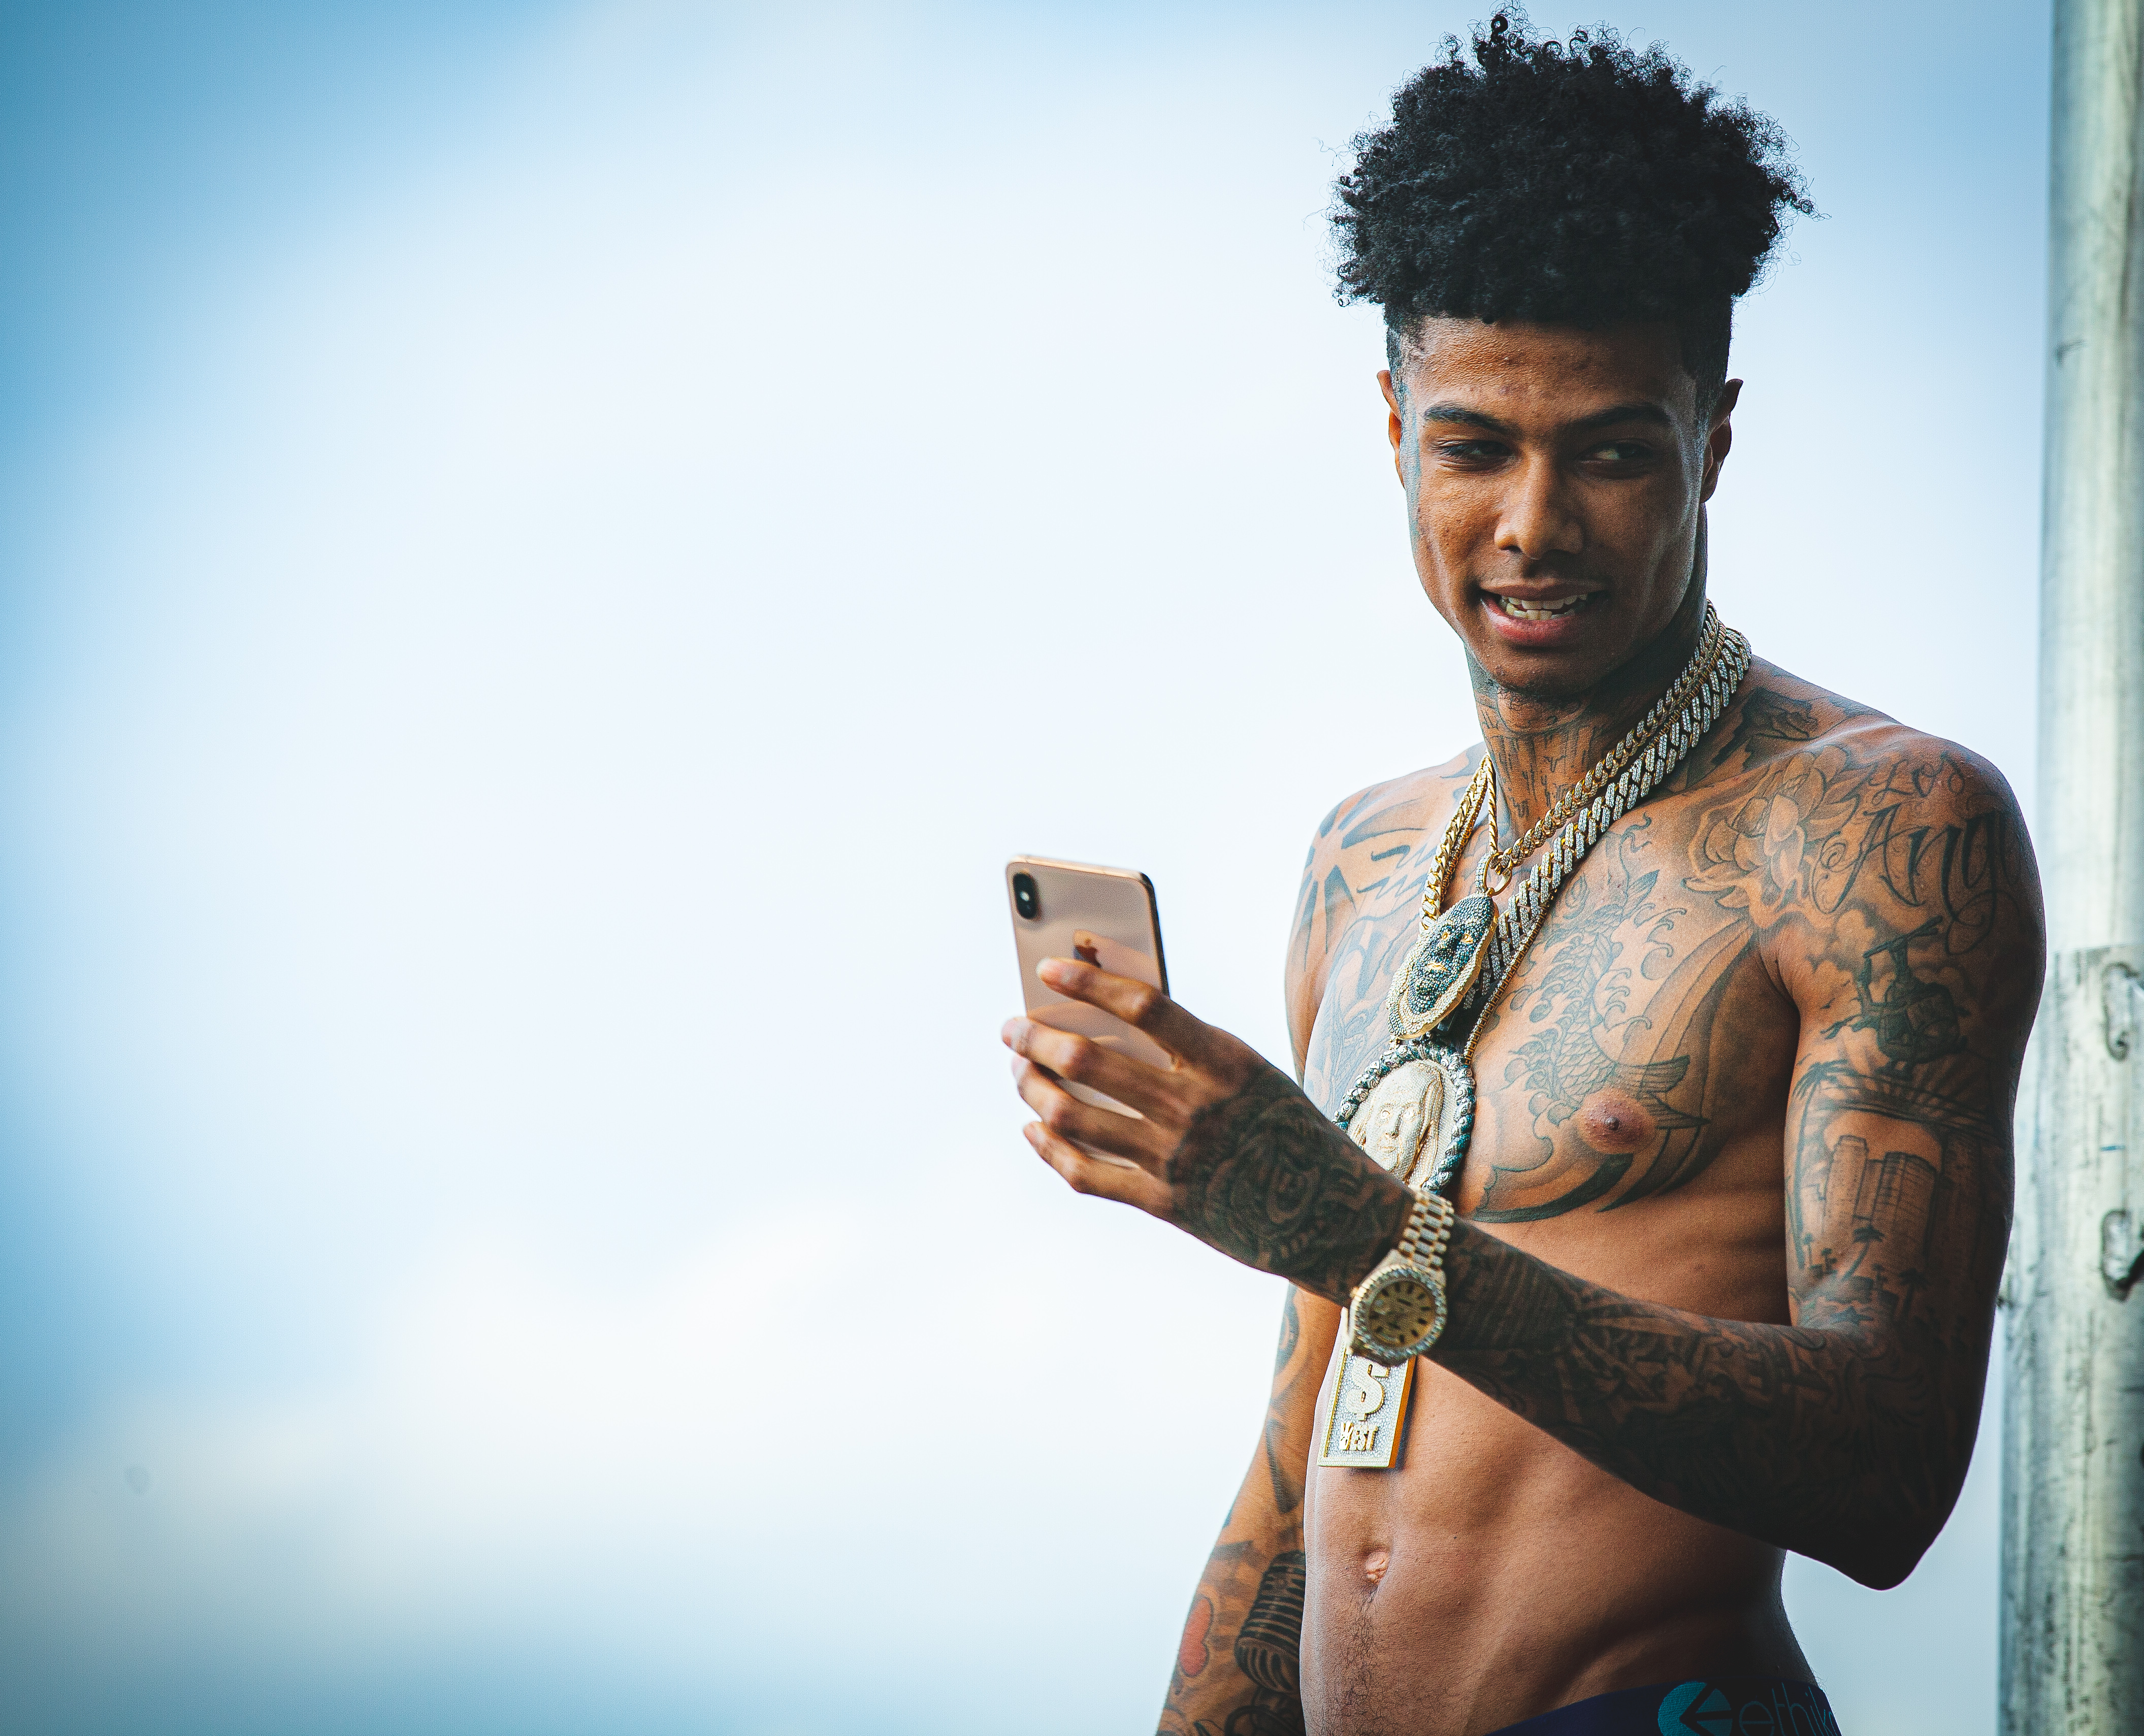 Struggle Rapper Blueface Arrested For Separate Case While In Court, Eventually Gets Out On Bail